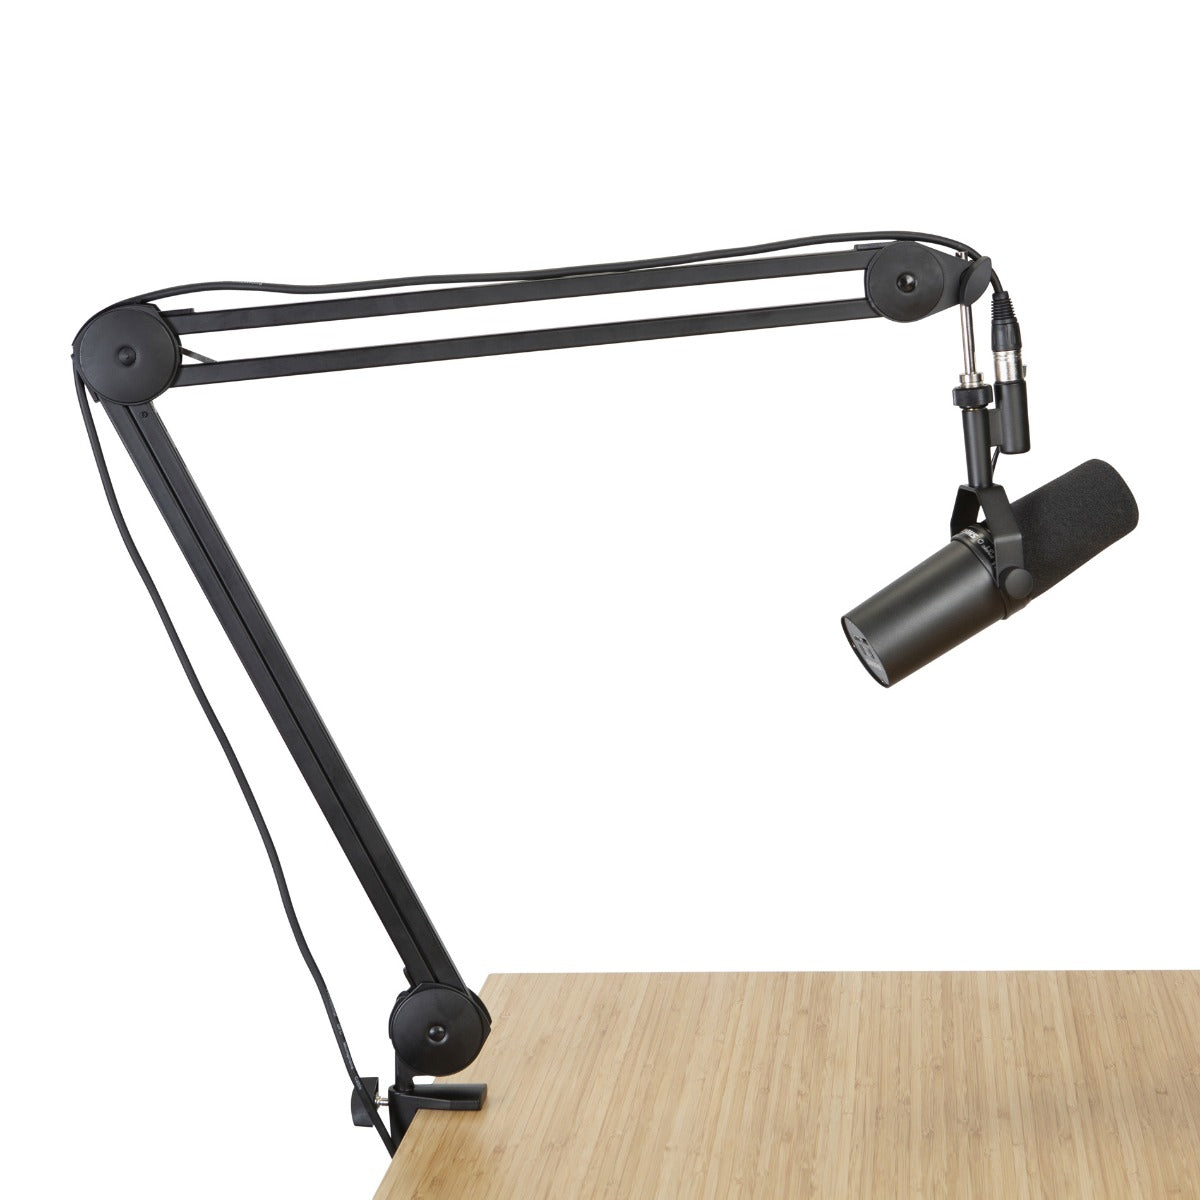 Image of the Gator Frameworks Desktop Mic Boom Stand clamped to a desk